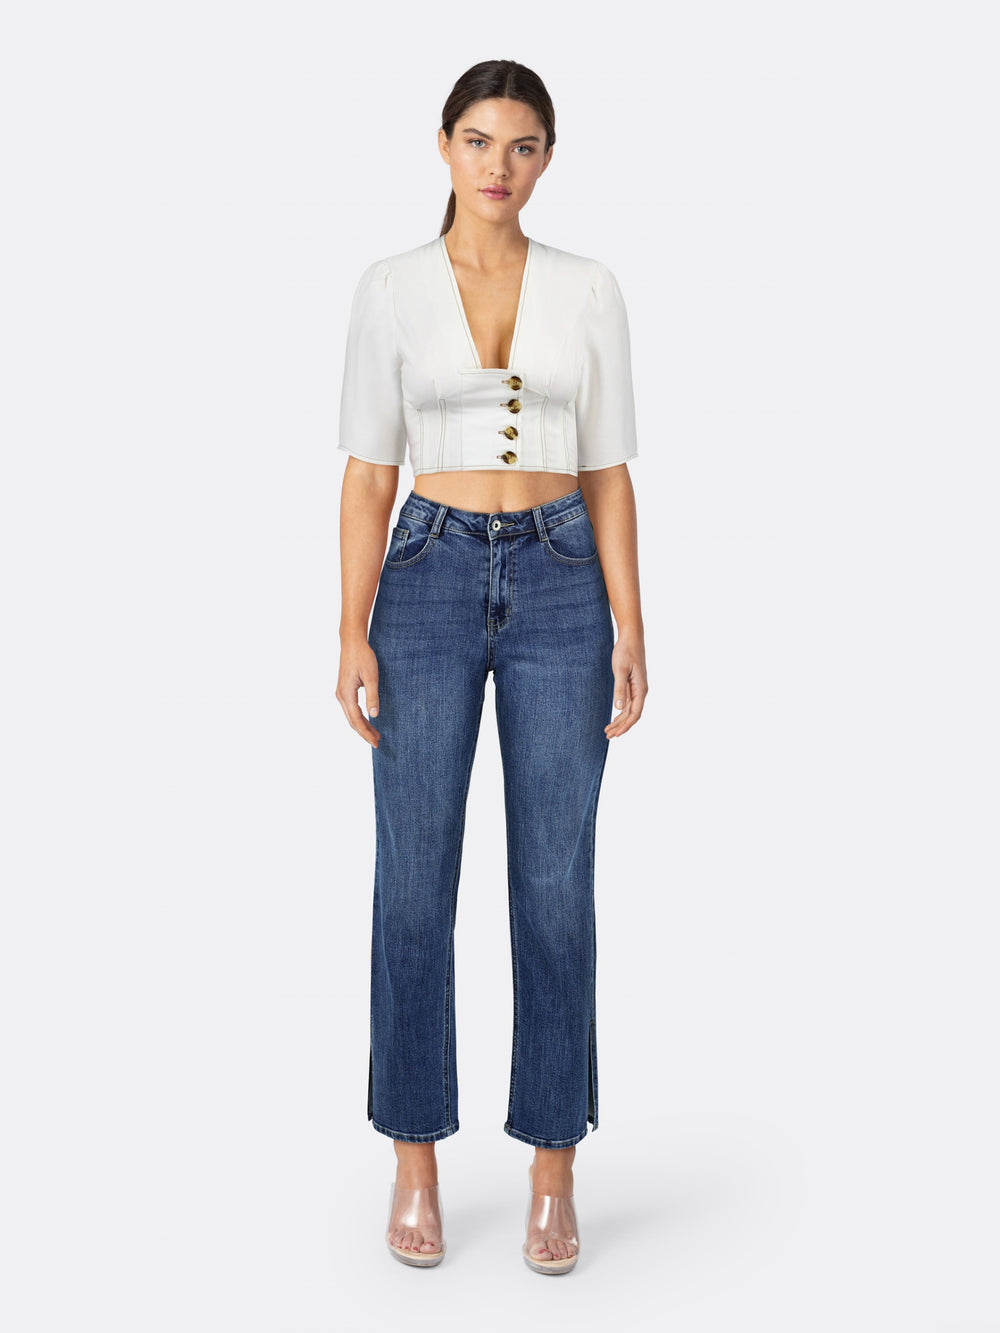 Half Sleeve Cropped Shirt V Neck with Button-up Front White Front